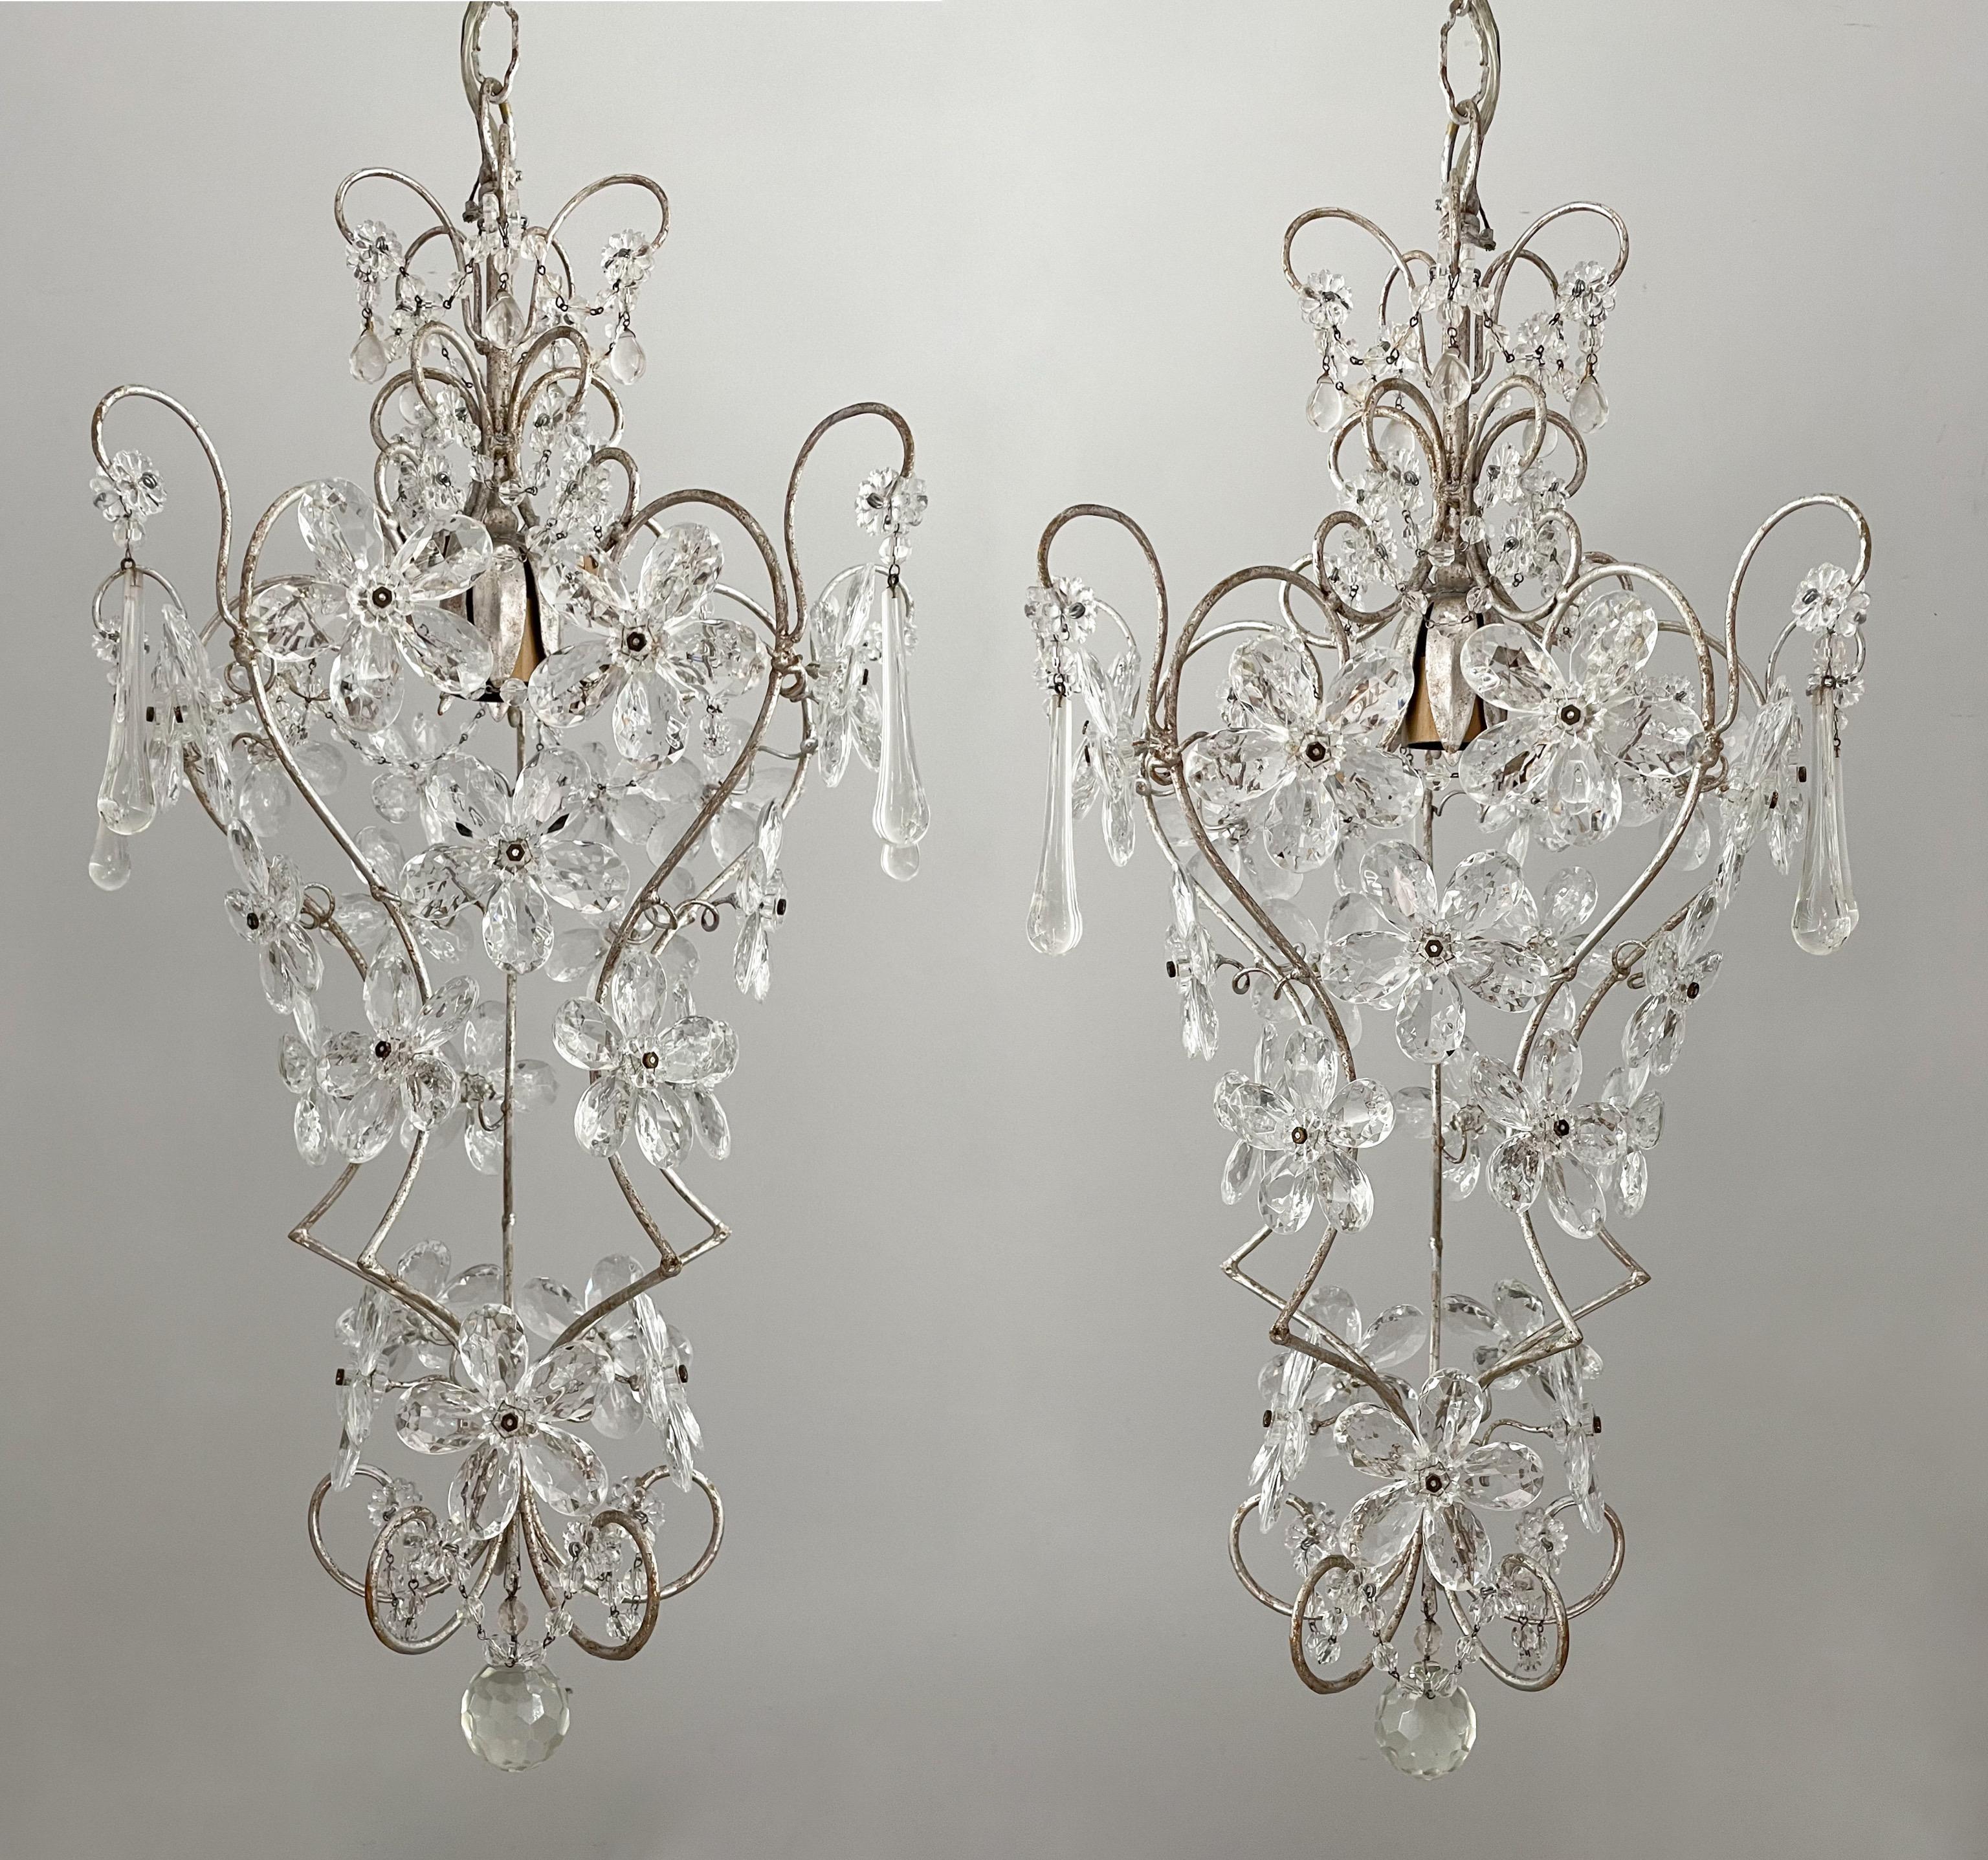 Beautiful, pair of Italian 1960s iron and crystal beaded chandeliers.

Each chandelier consists of a shapely scrolled-iron frame with a hand-applied silverleaf finish and flowers made of faceted crystal prisms. 

The chandeliers are in working